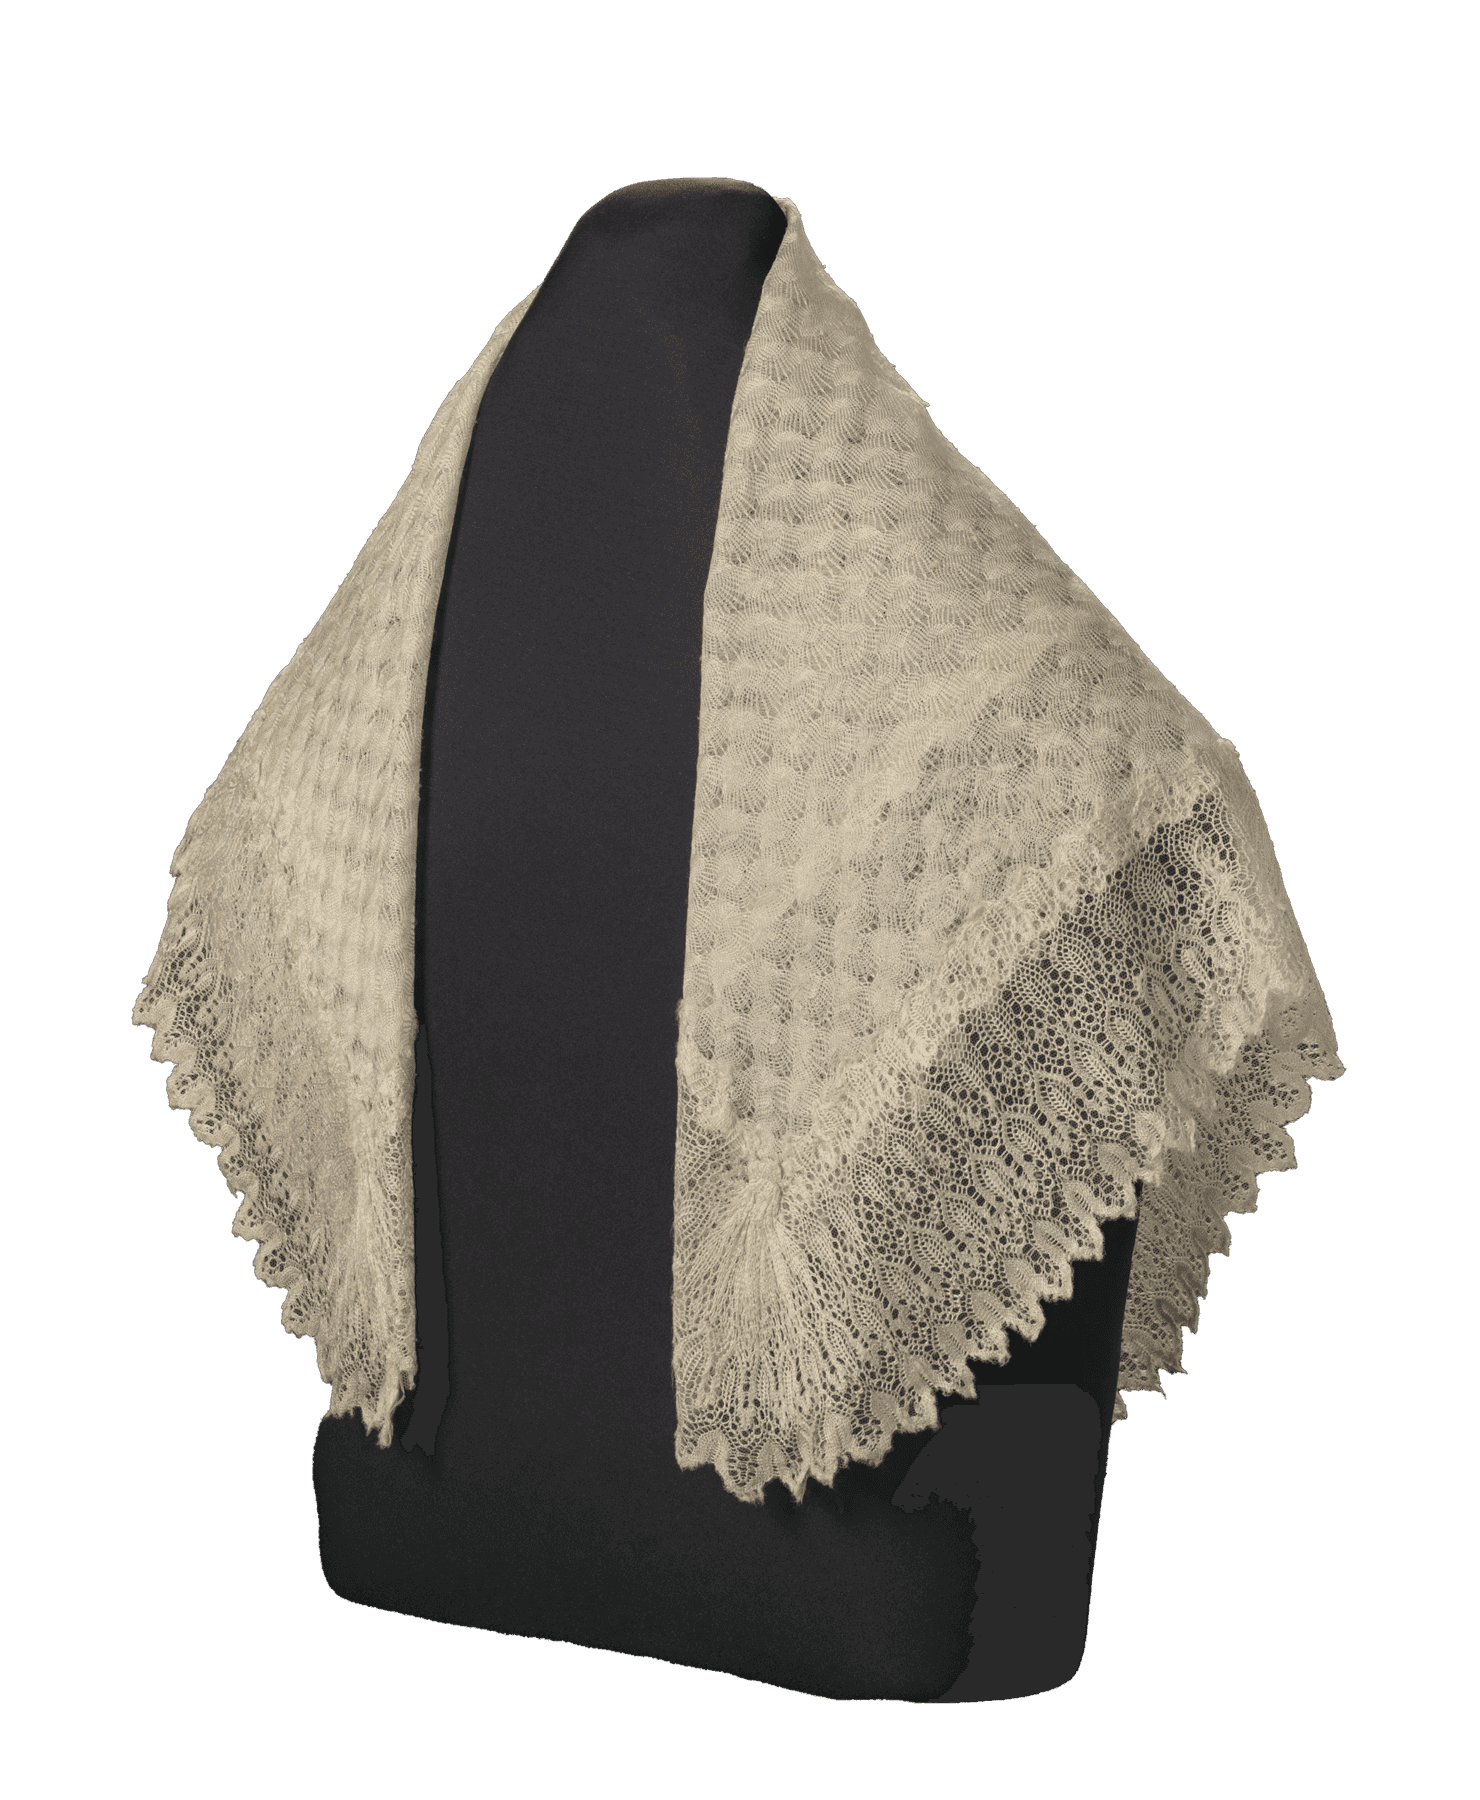 A white, square-shaped shawl made of silk lace and linen, given to Harriet Tubman by Queen Victoria around 1897.